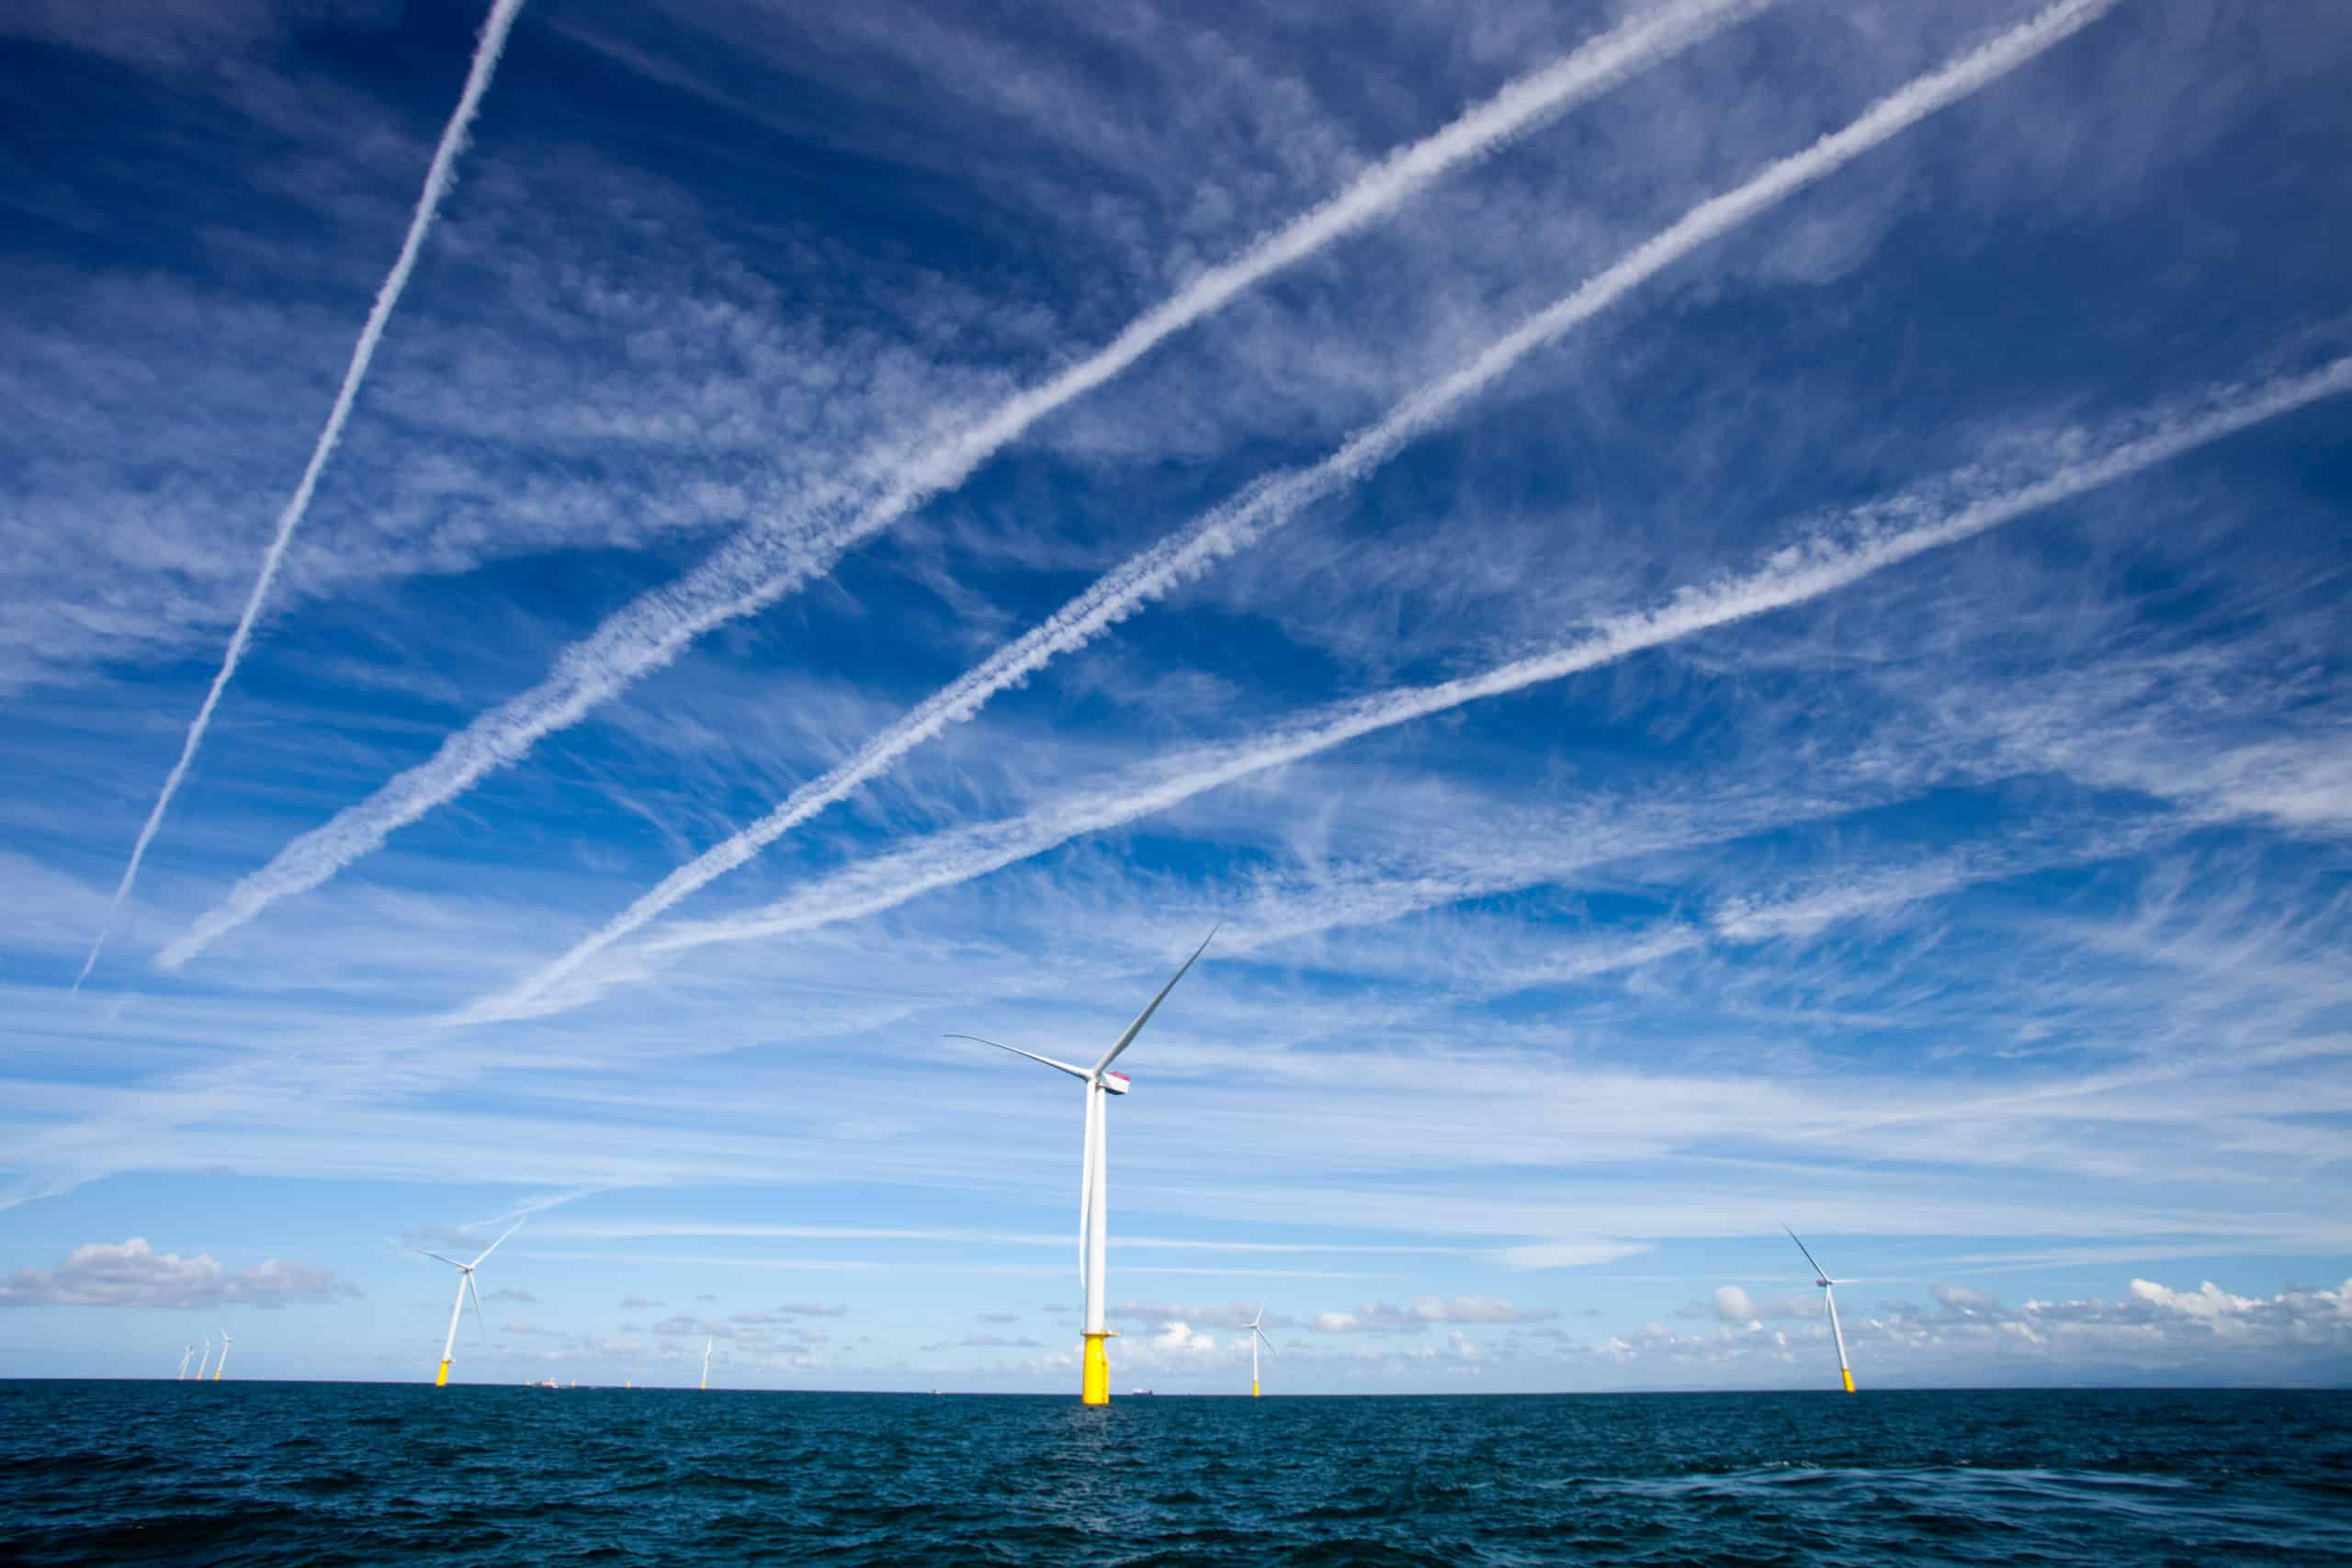 C6EJWA Contrails over  wind turbines in the Walney offshore wind farm.